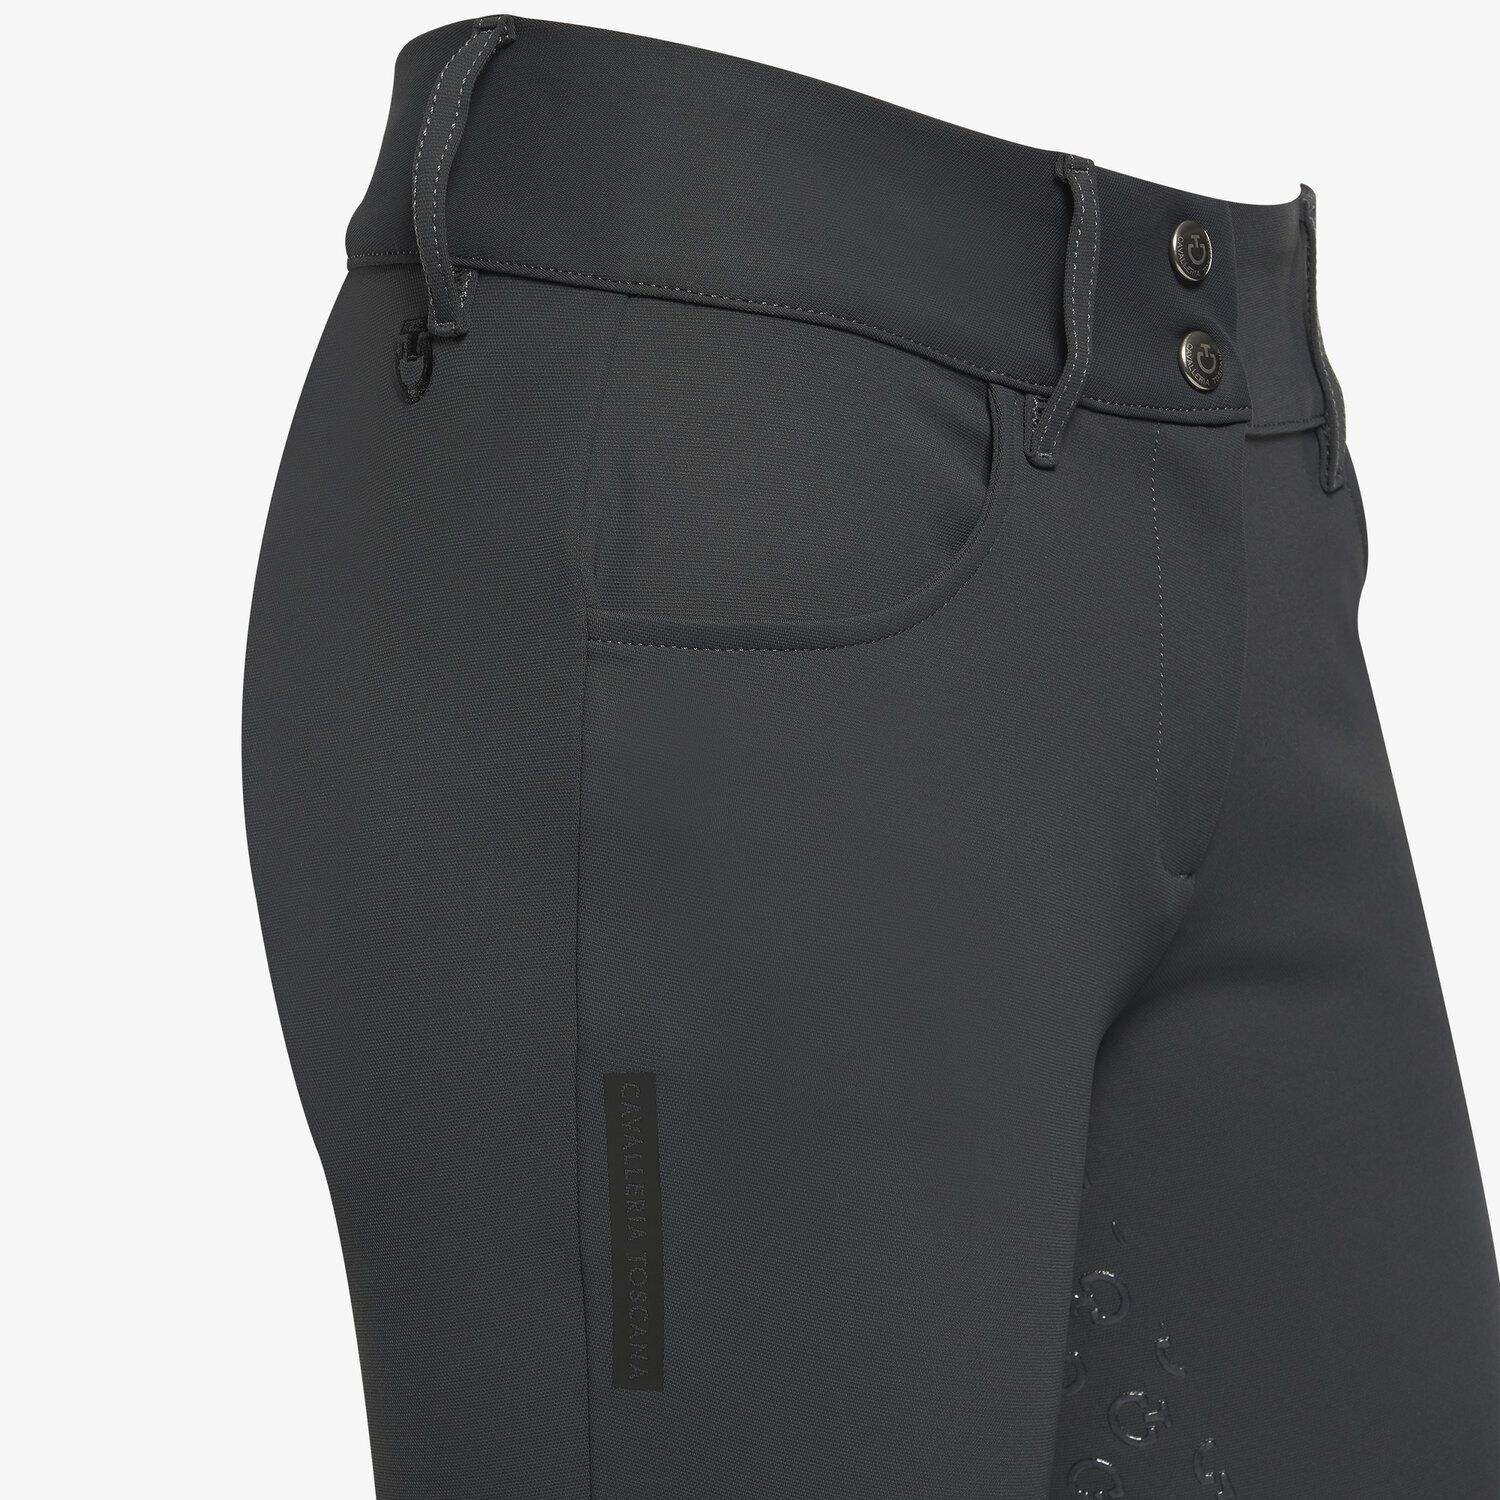 Cavalleria Toscana Women's dressage breeches with perforated logo tape CHARCOAL GREY-4